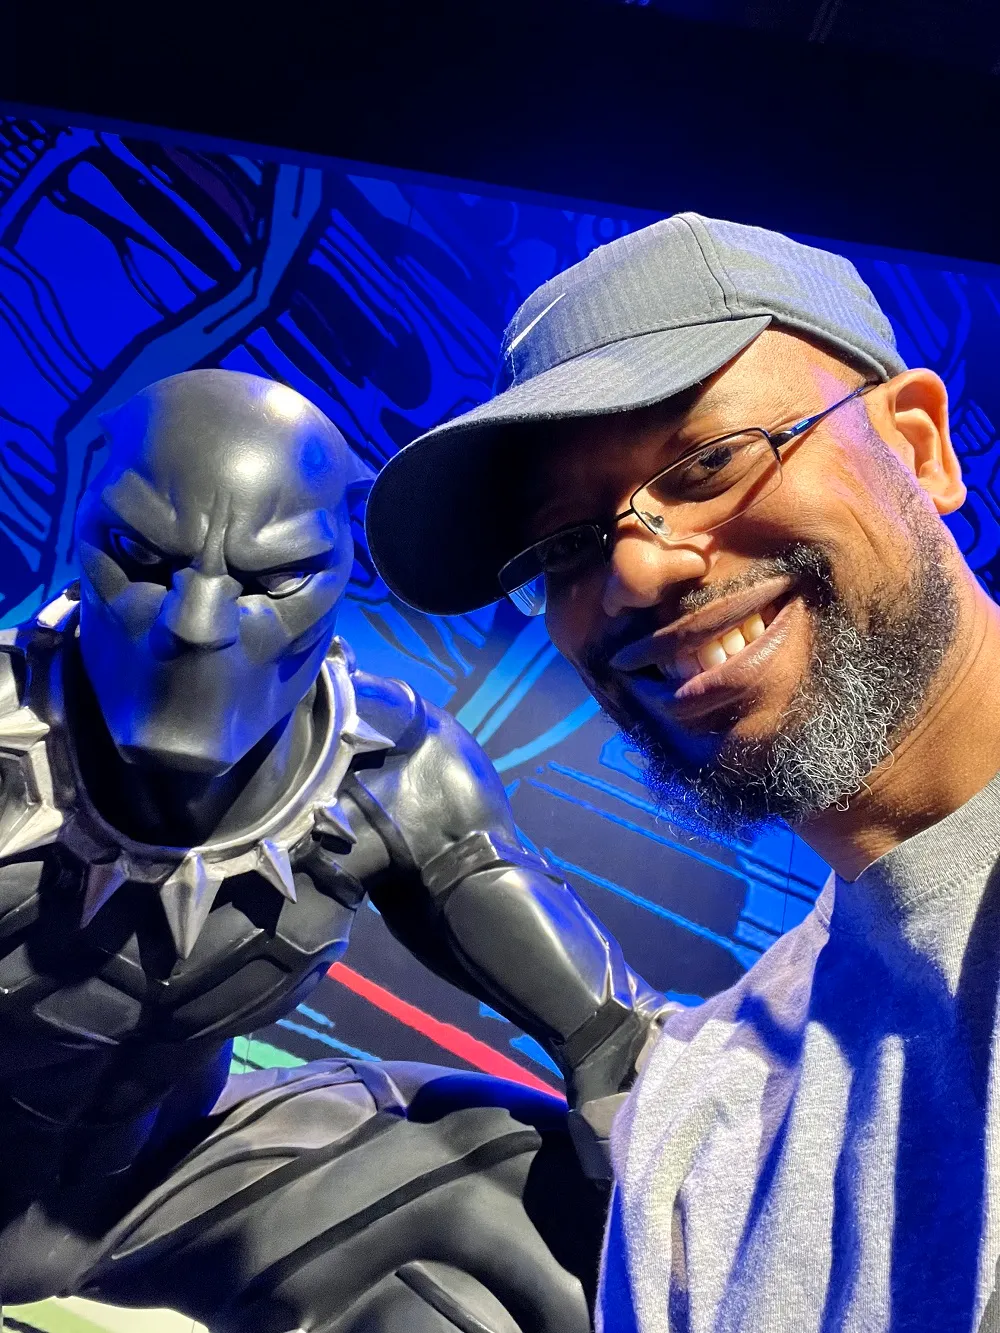 Me and Black Panther suit at Discovery Place